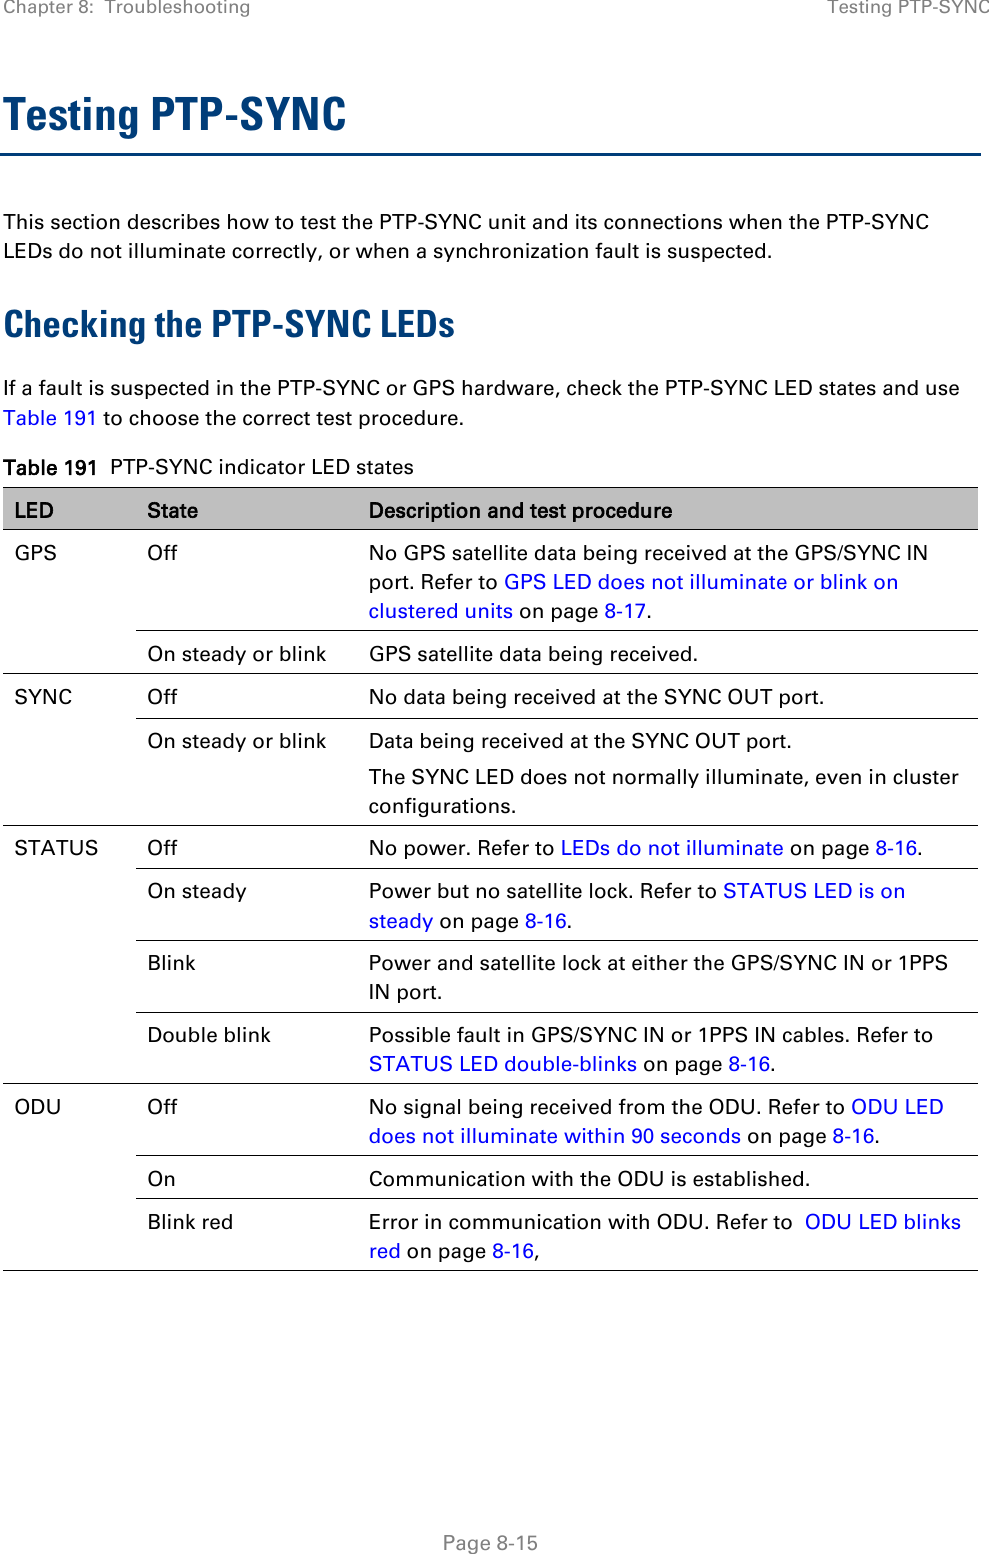 Chapter 8:  Troubleshooting Testing PTP-SYNC  Testing PTP-SYNC This section describes how to test the PTP-SYNC unit and its connections when the PTP-SYNC LEDs do not illuminate correctly, or when a synchronization fault is suspected. Checking the PTP-SYNC LEDs If a fault is suspected in the PTP-SYNC or GPS hardware, check the PTP-SYNC LED states and use Table 191 to choose the correct test procedure. Table 191  PTP-SYNC indicator LED states LED State Description and test procedure GPS Off No GPS satellite data being received at the GPS/SYNC IN port. Refer to GPS LED does not illuminate or blink on clustered units on page 8-17. On steady or blink GPS satellite data being received. SYNC Off No data being received at the SYNC OUT port. On steady or blink Data being received at the SYNC OUT port. The SYNC LED does not normally illuminate, even in cluster configurations. STATUS Off No power. Refer to LEDs do not illuminate on page 8-16. On steady Power but no satellite lock. Refer to STATUS LED is on steady on page 8-16. Blink Power and satellite lock at either the GPS/SYNC IN or 1PPS IN port. Double blink Possible fault in GPS/SYNC IN or 1PPS IN cables. Refer to STATUS LED double-blinks on page 8-16. ODU Off No signal being received from the ODU. Refer to ODU LED does not illuminate within 90 seconds on page 8-16. On Communication with the ODU is established. Blink red Error in communication with ODU. Refer to  ODU LED blinks red on page 8-16,   Page 8-15 